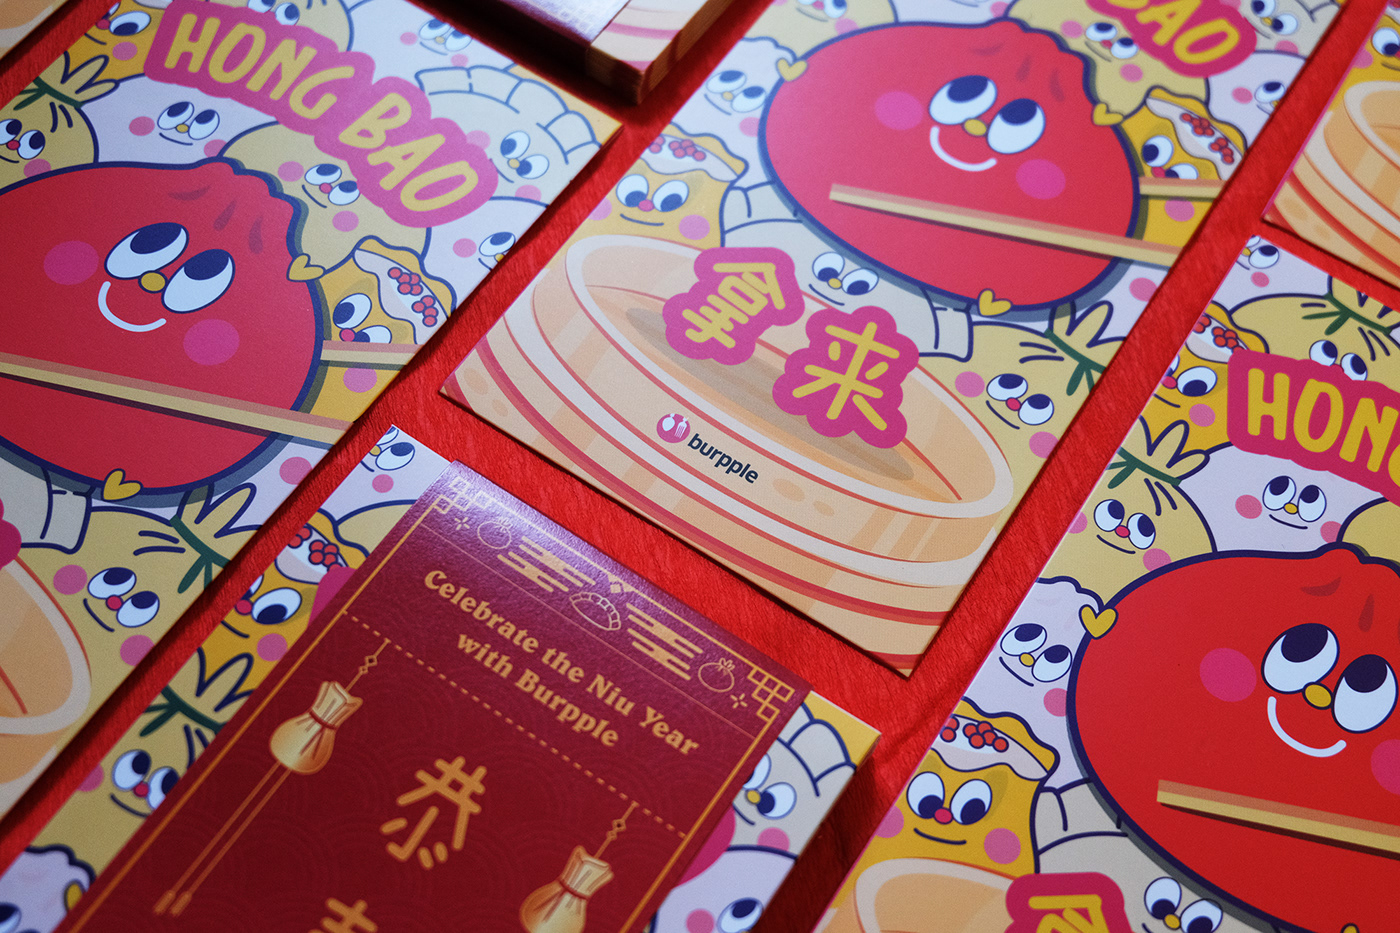 ang bao chinese chinese new year dumpling Food  hong bao new year oriental Red Packet Red Packet Design